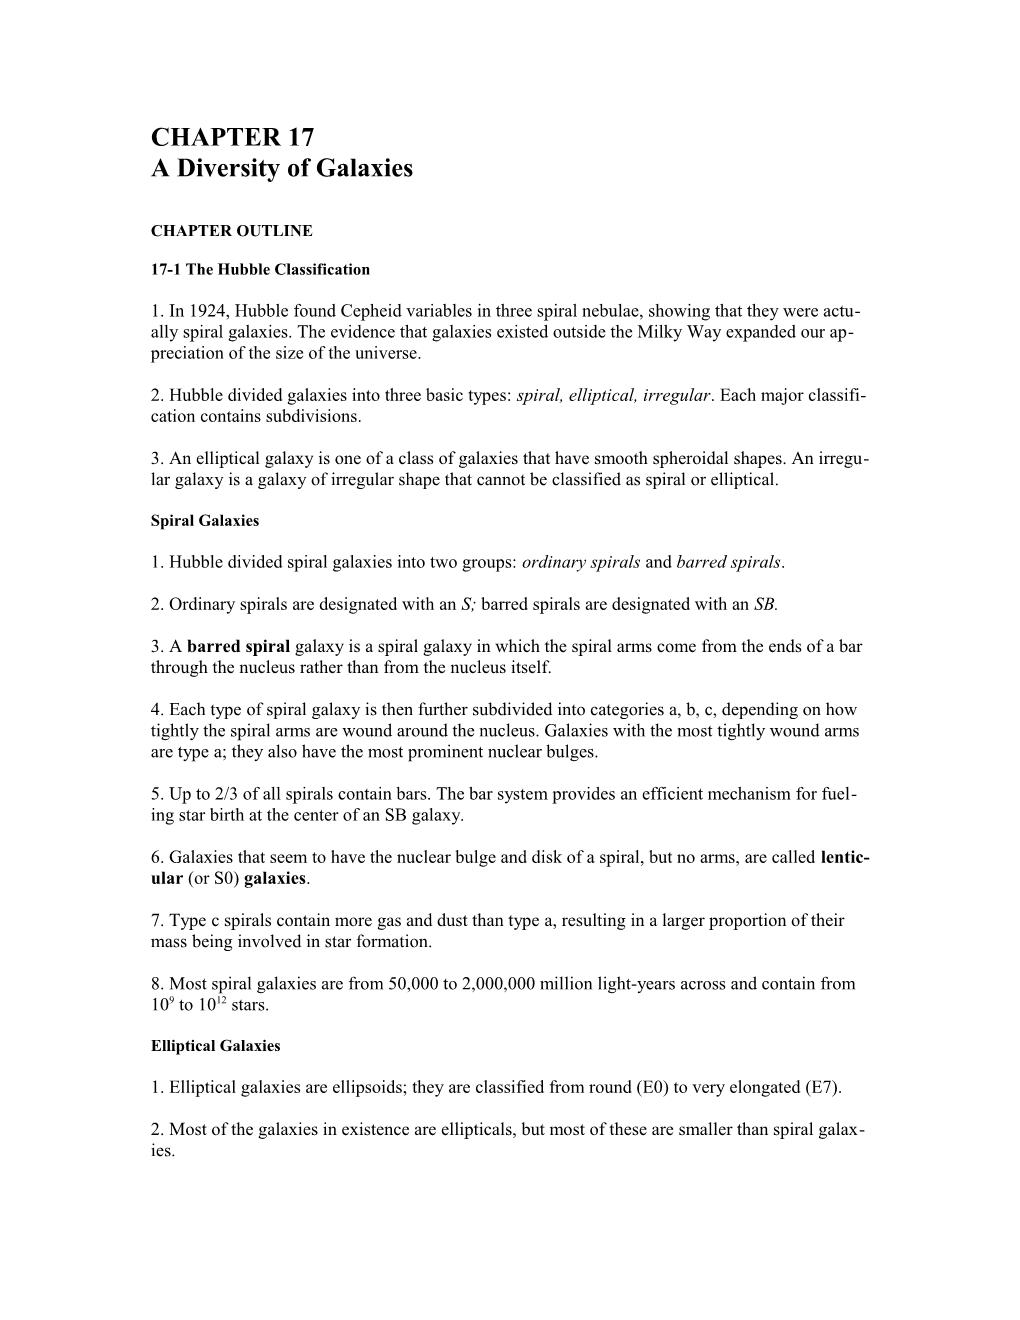 CHAPTER17 a Diversity of Galaxies CHAPTER OUTLINE 17-1 the Hubble Classification 1. In